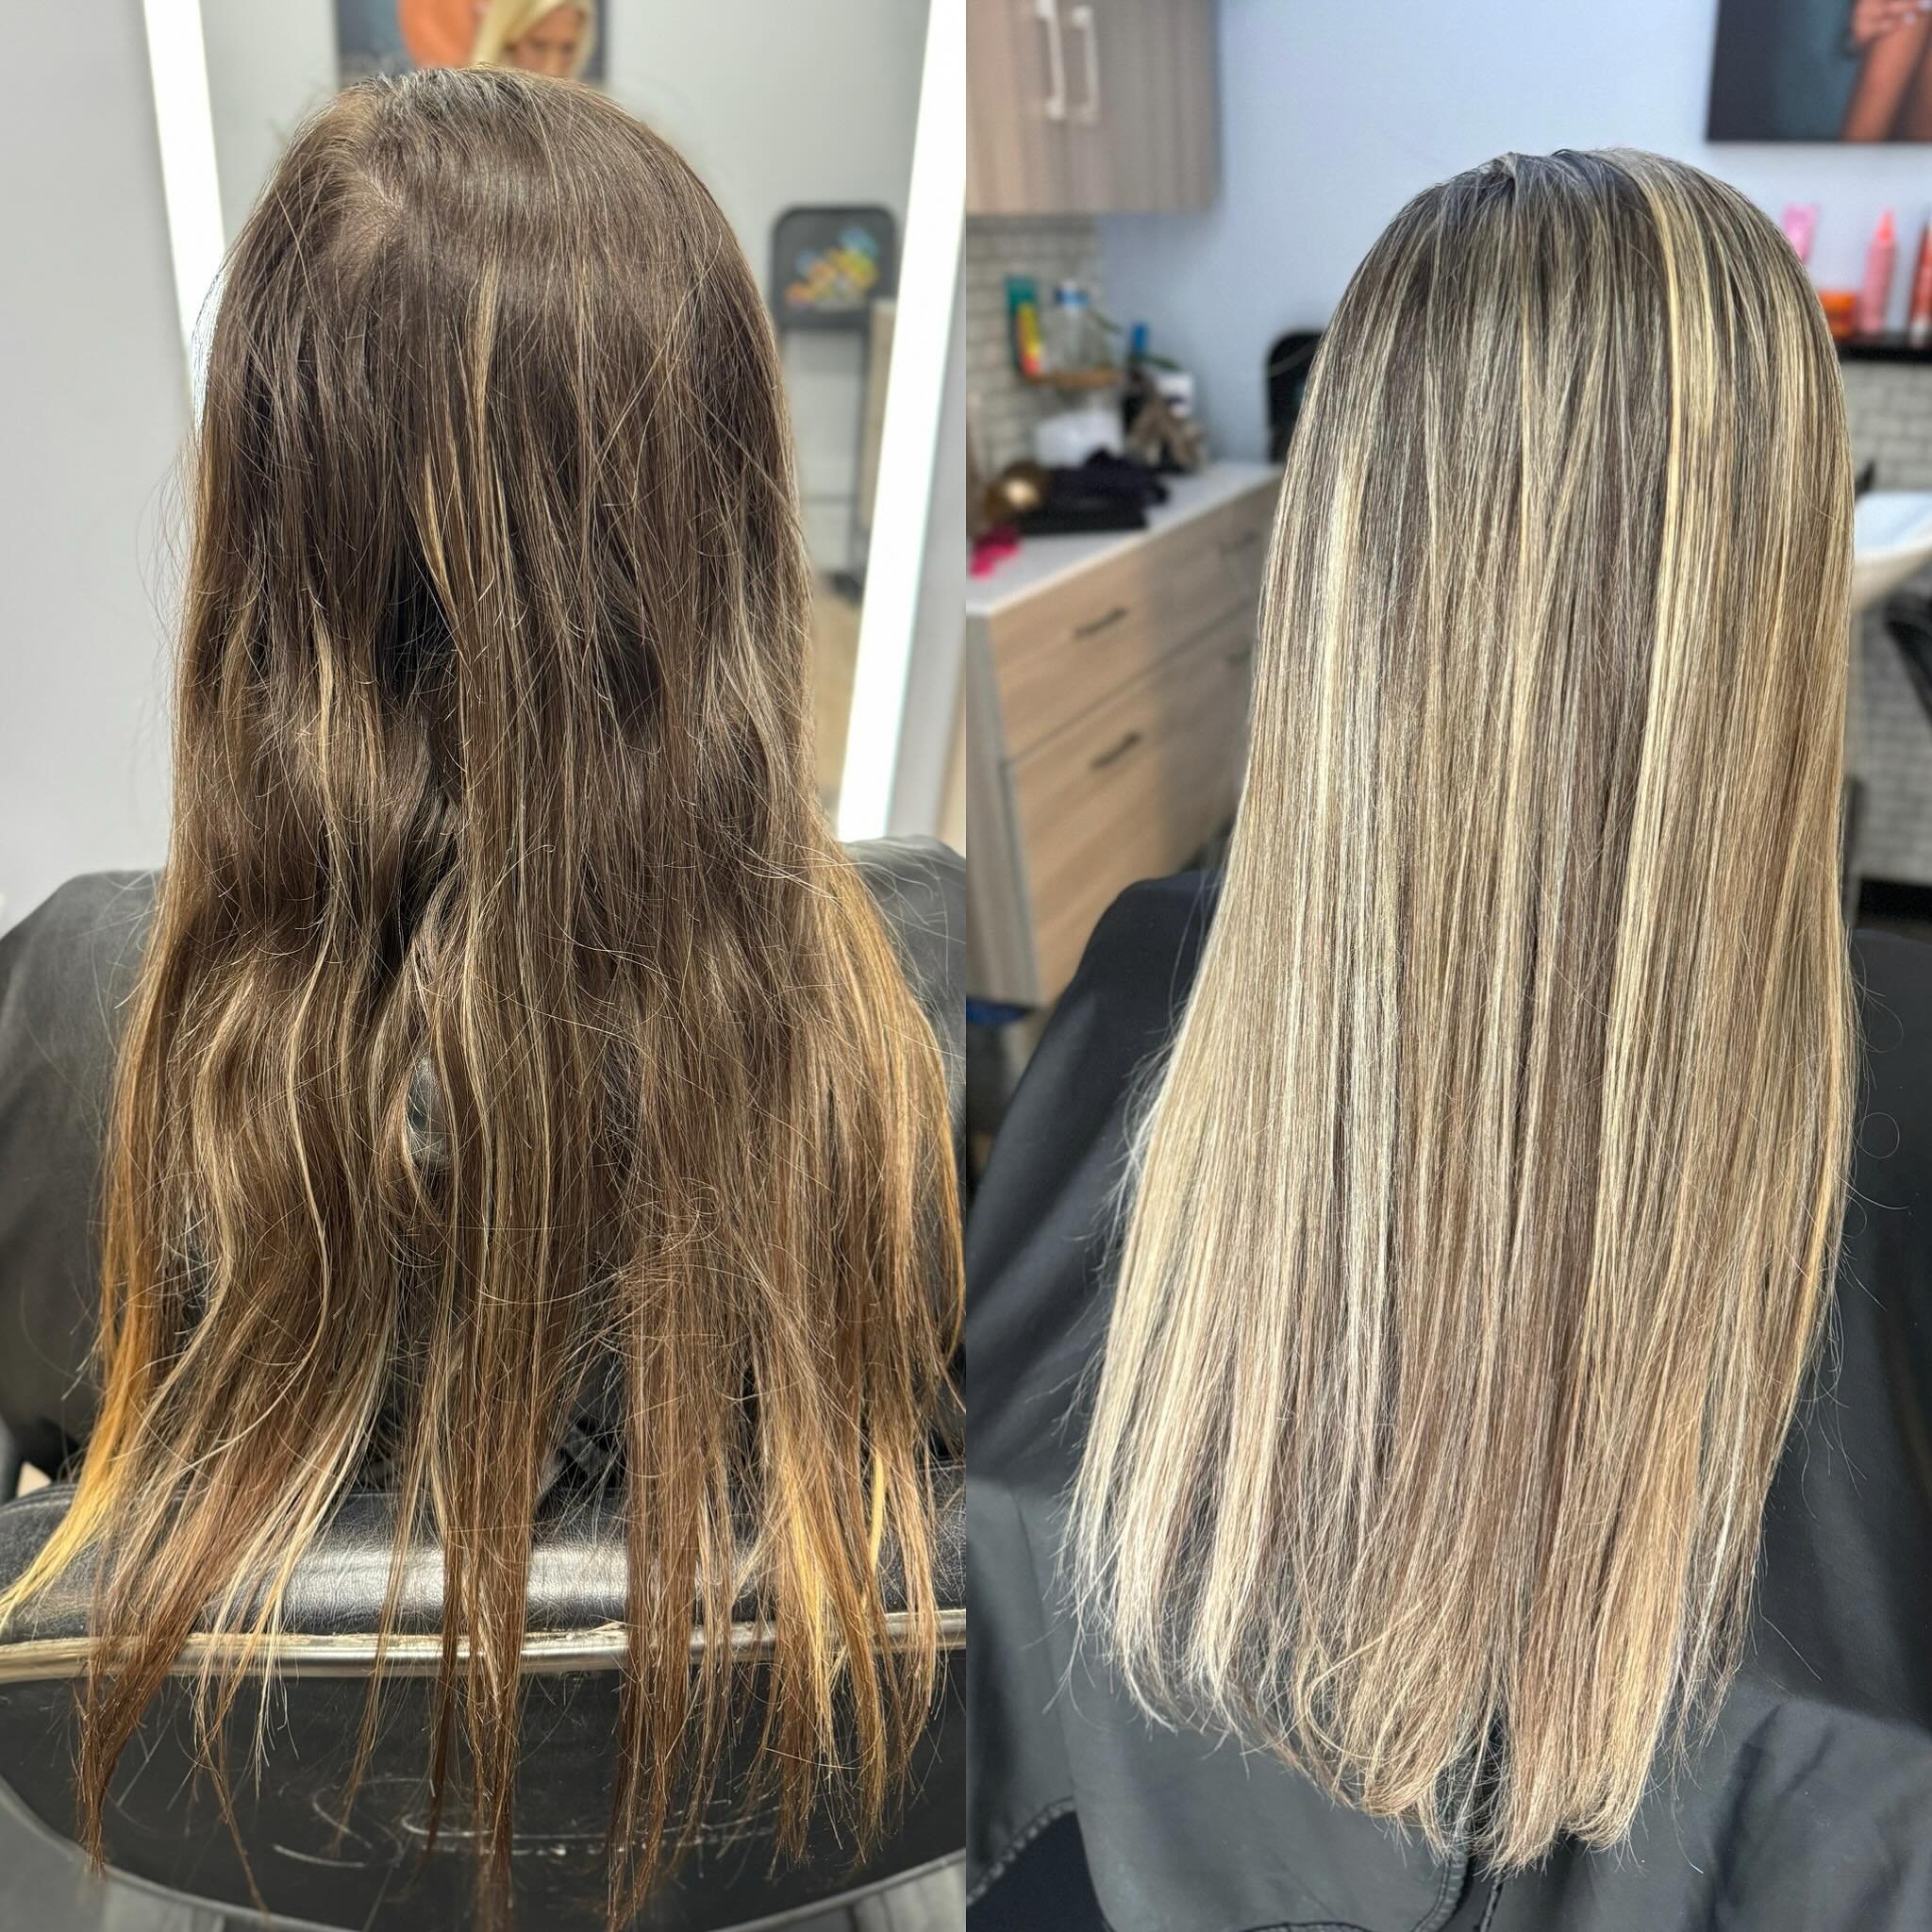 TRANSFORMATION TUESDAY &hearts;️

#blonde #blondehair #blondebalayage #blondefoilayage #brunette #brunettehair #hairtransformation #houstonhairstylist #cypresstxhairstylist #LOFT87 #aHAIRexperience